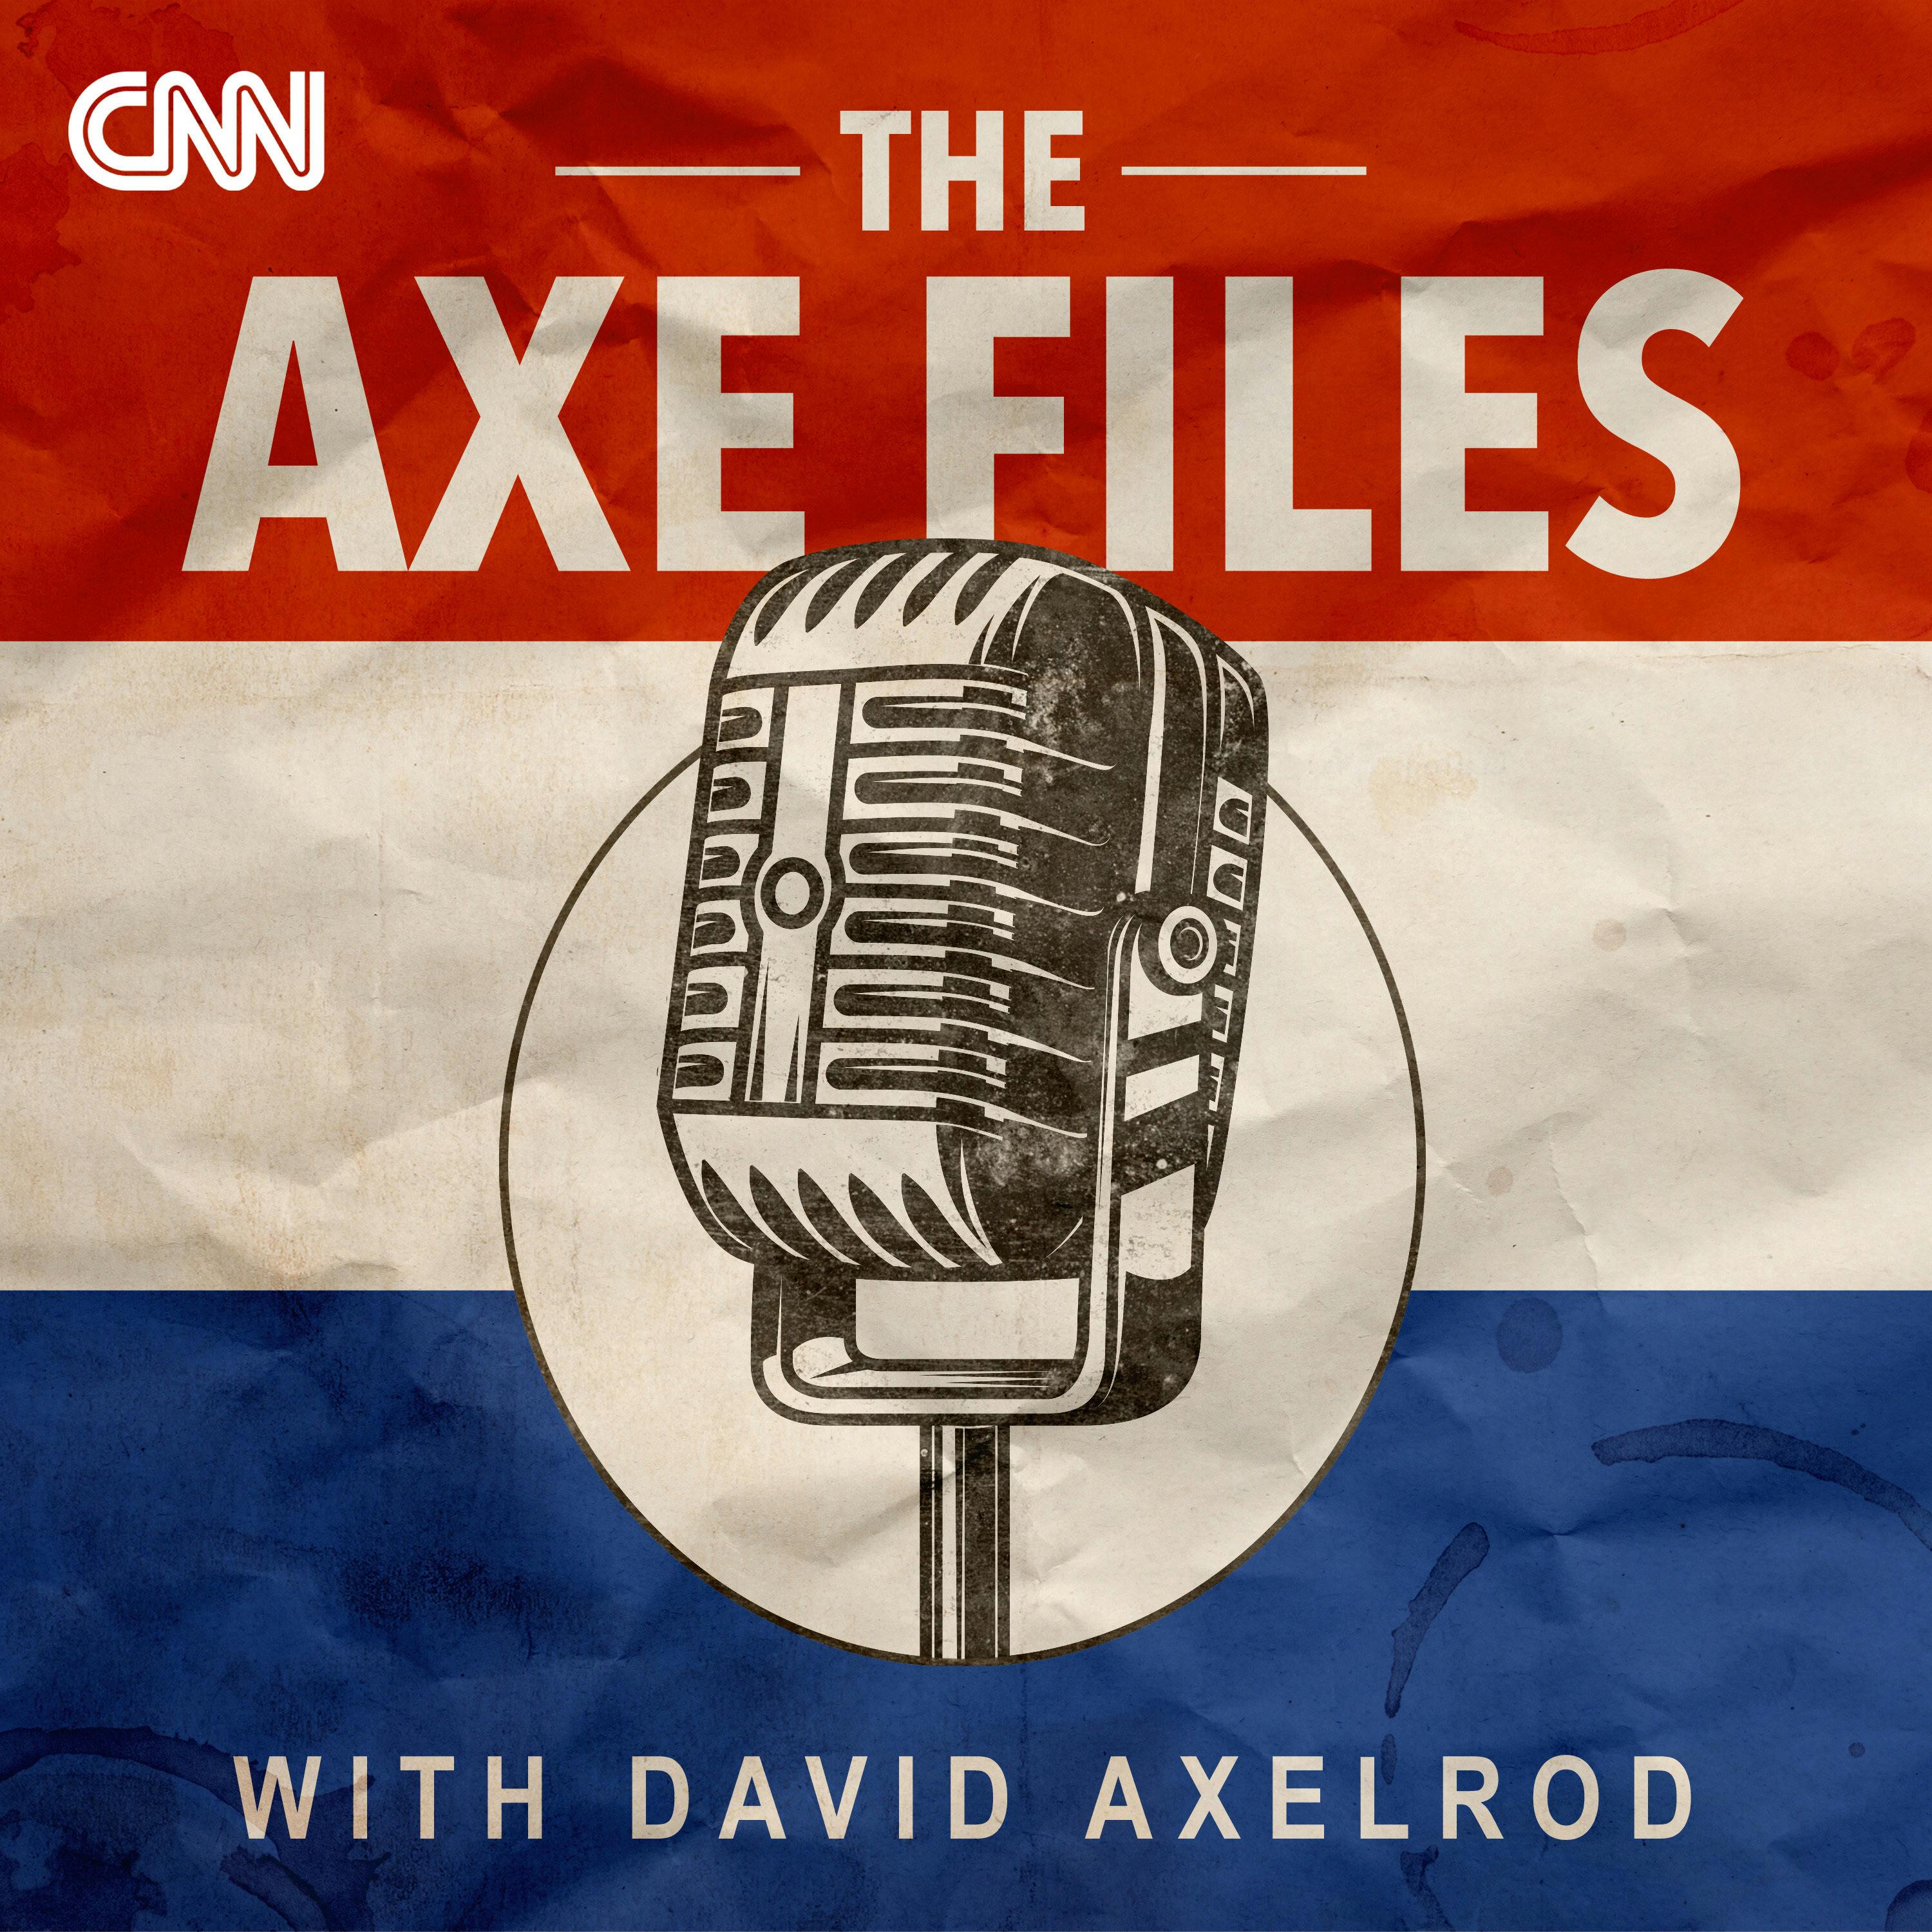 The Axe Files presents The Assignment with Audie Cornish